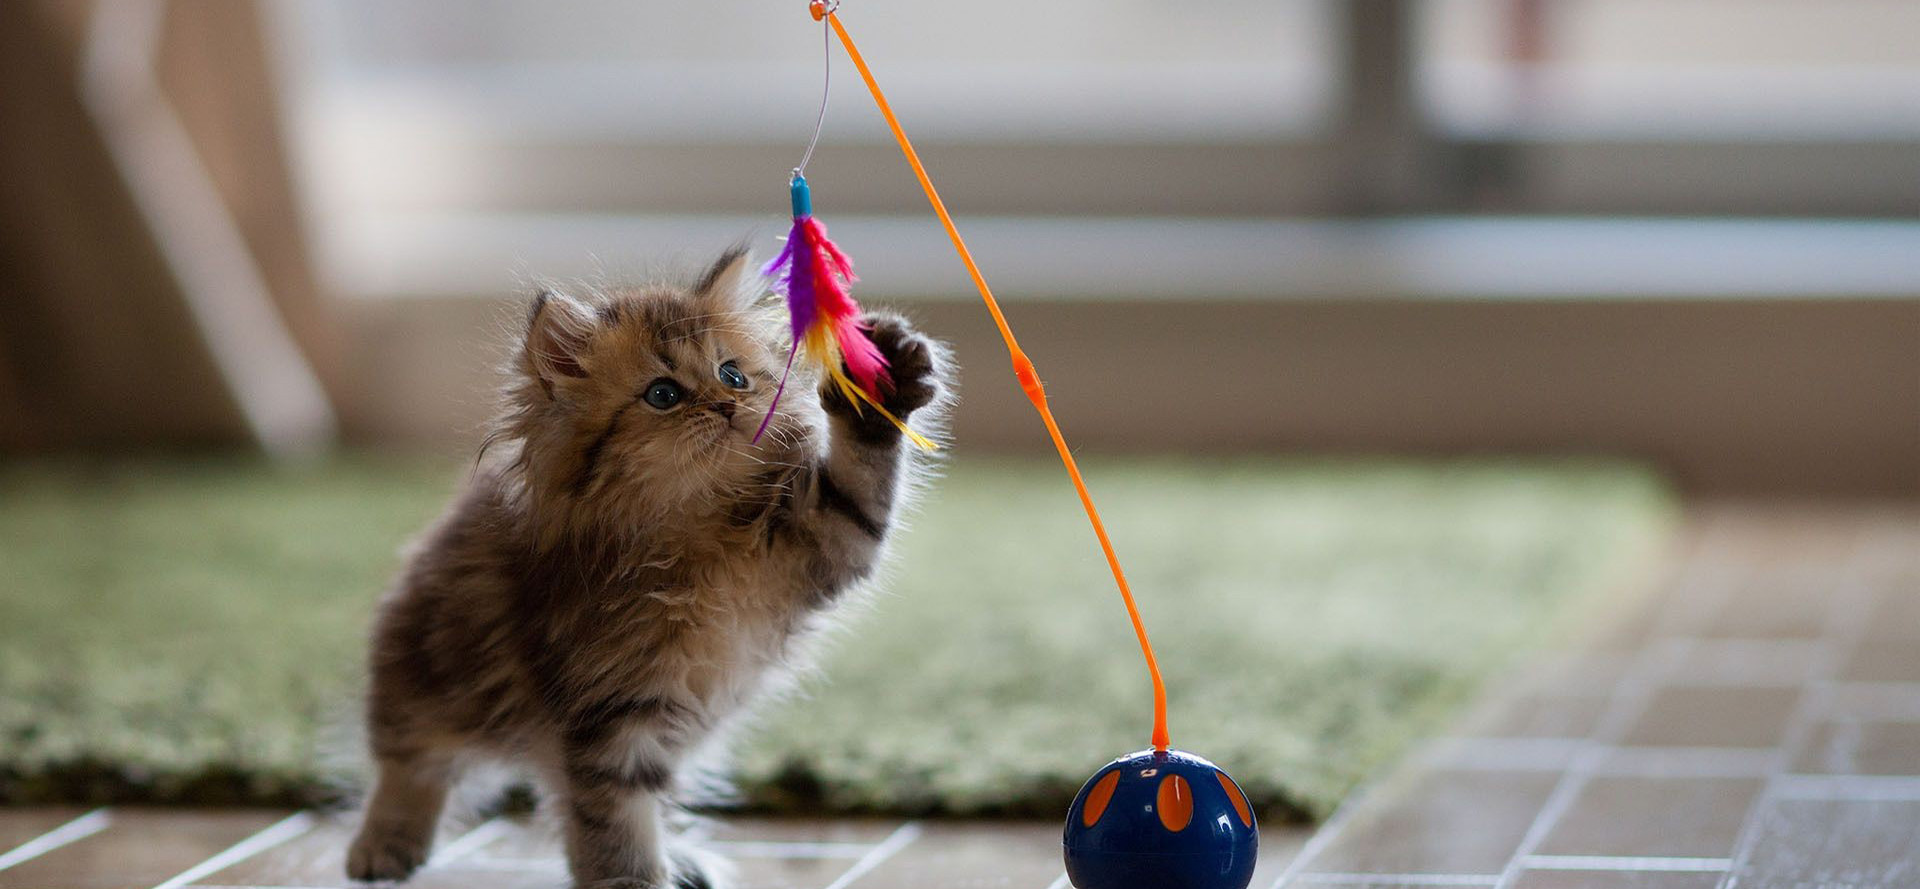 Cat playing with a toy.